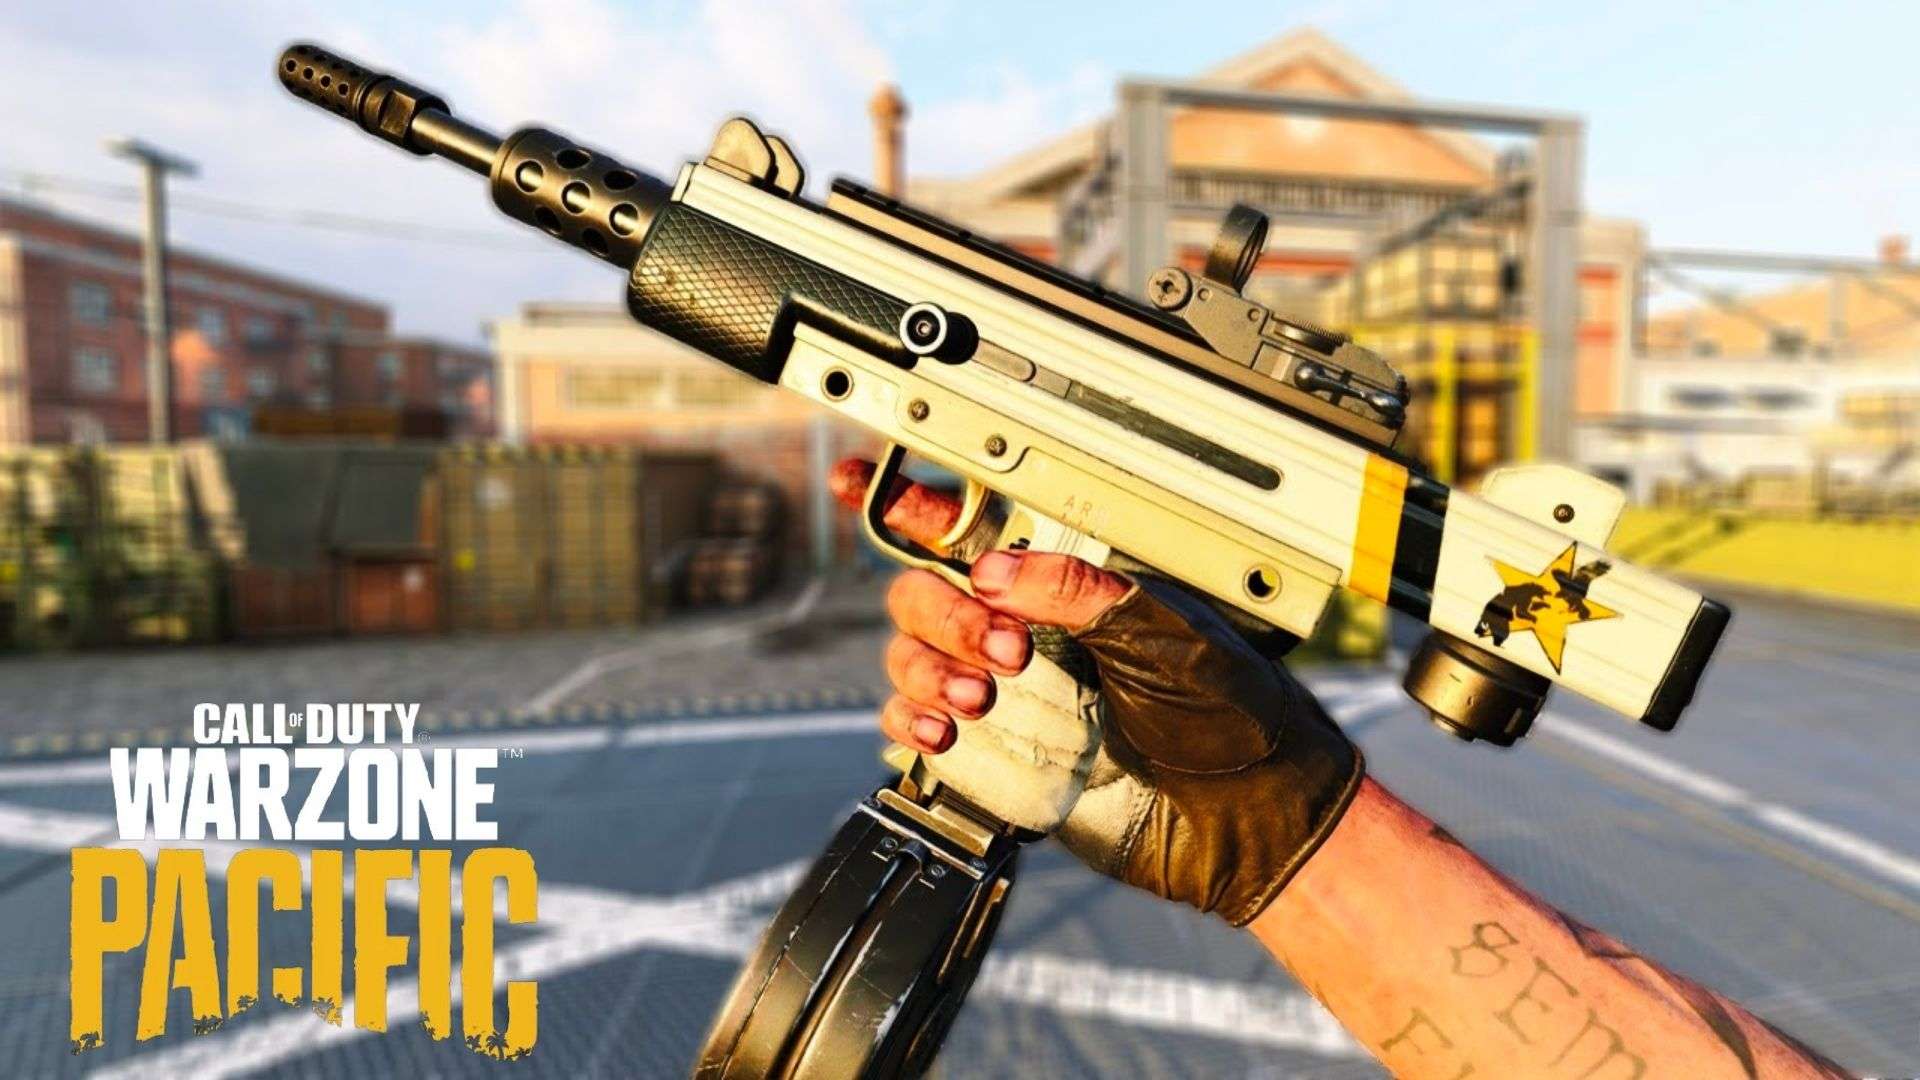 Gold Milano being held high in Call of Duty Black Ops Cold War